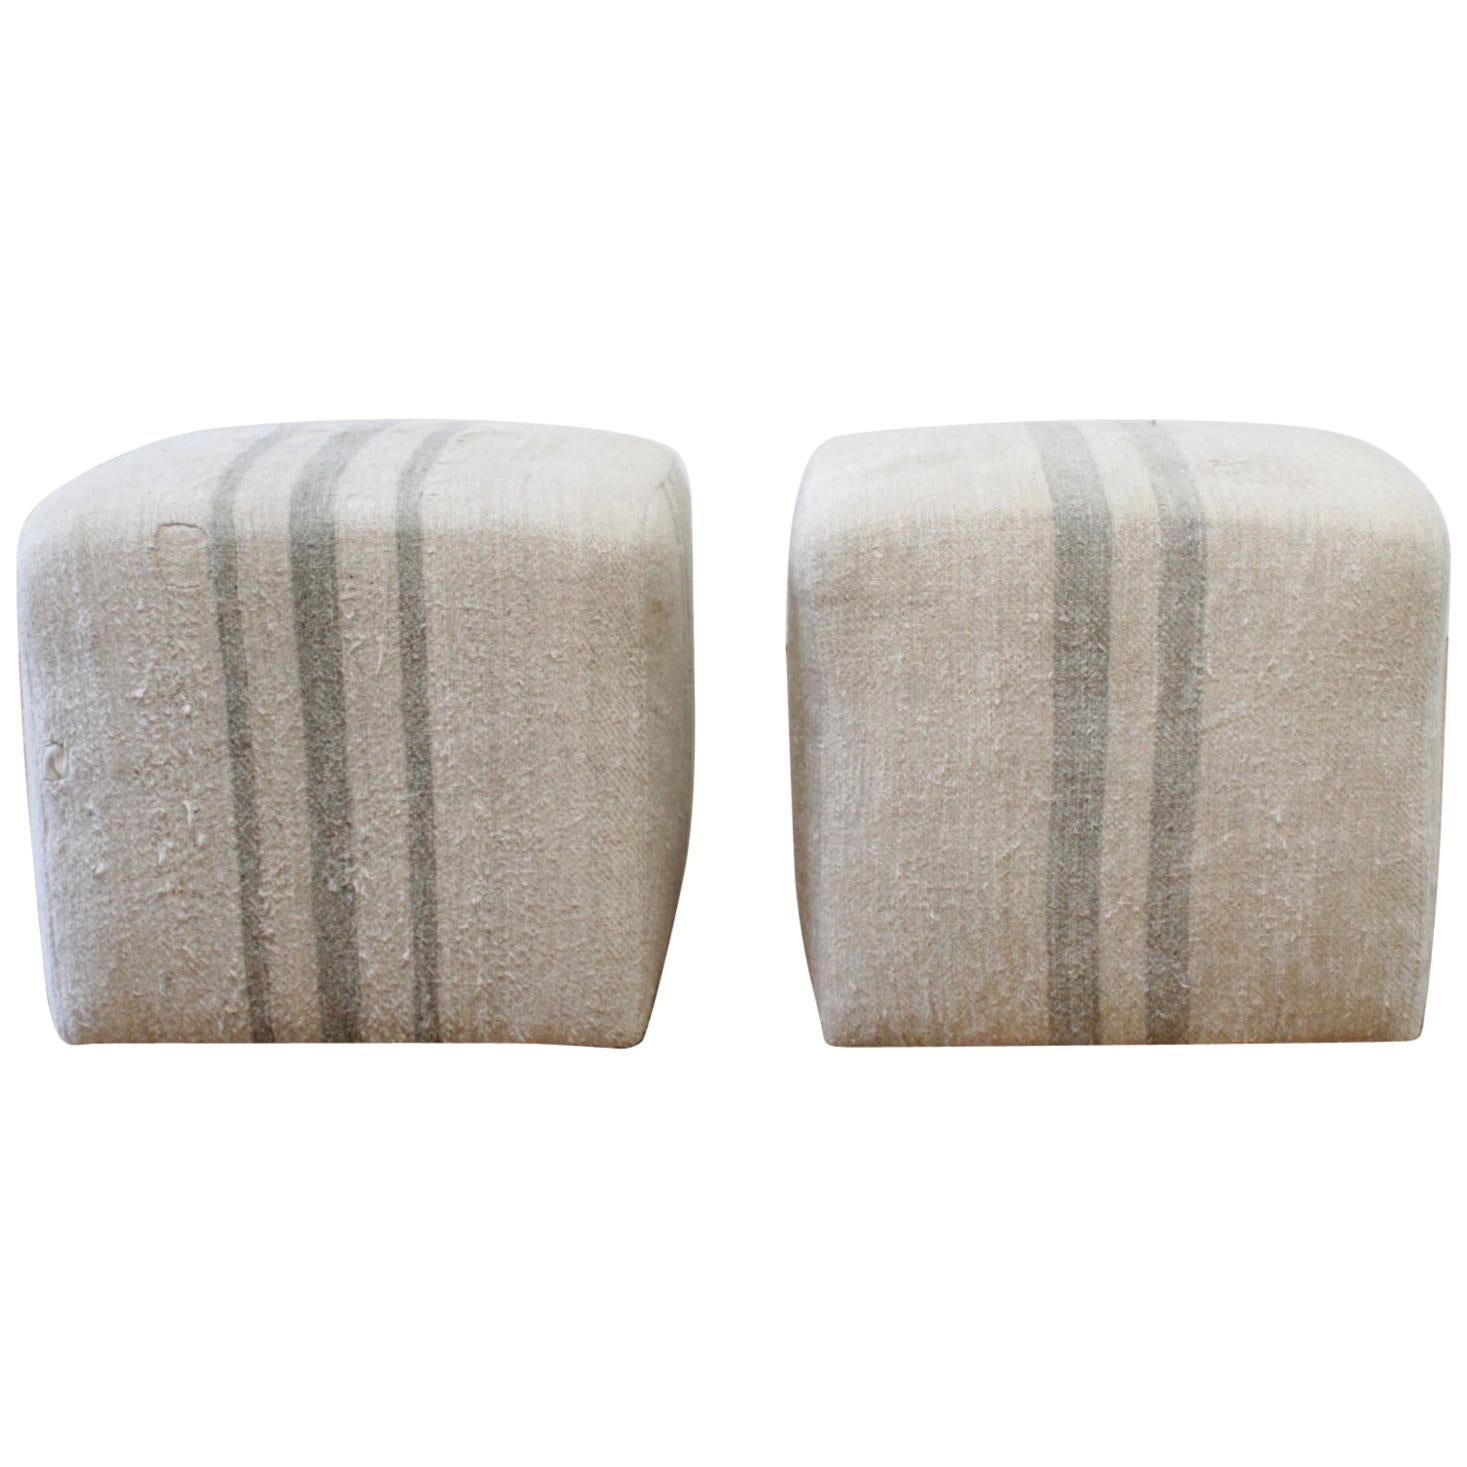 Pair of Grainsack Cube Ottoman Oatmeal Color with Light Seaglass Stripe